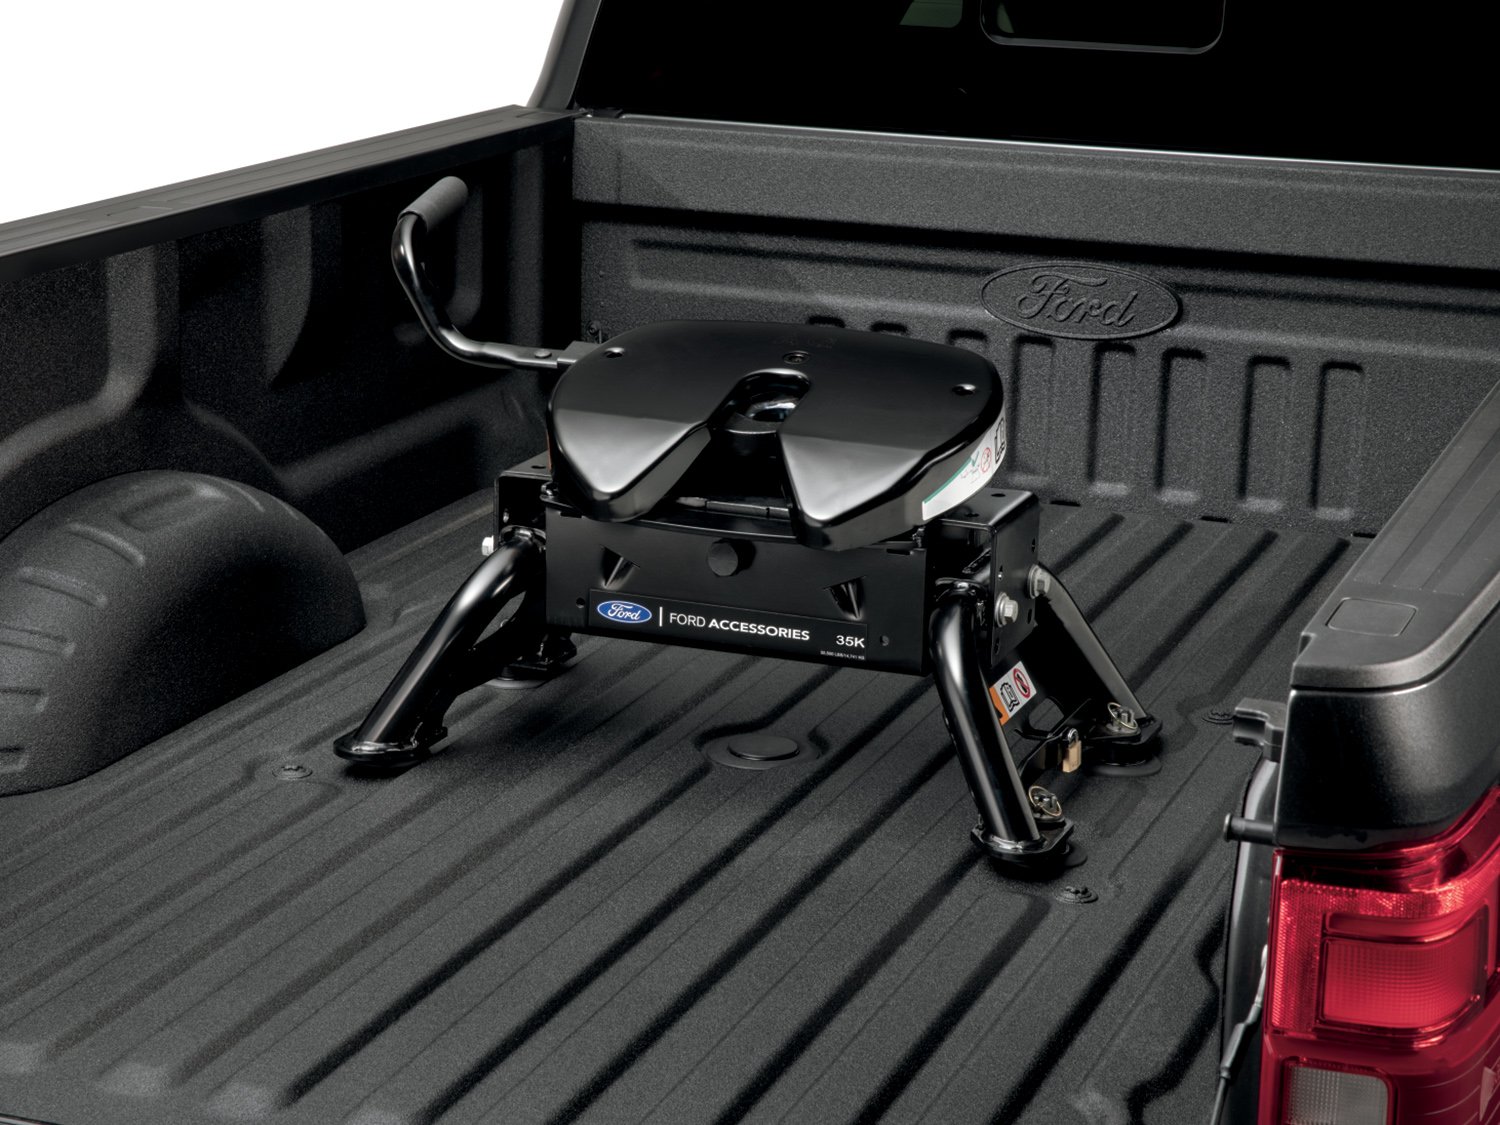 Image for Hitch Kit - 5th Wheel, 35,000 lbs., For 8.0 Bed Only from AccessoriesCanada